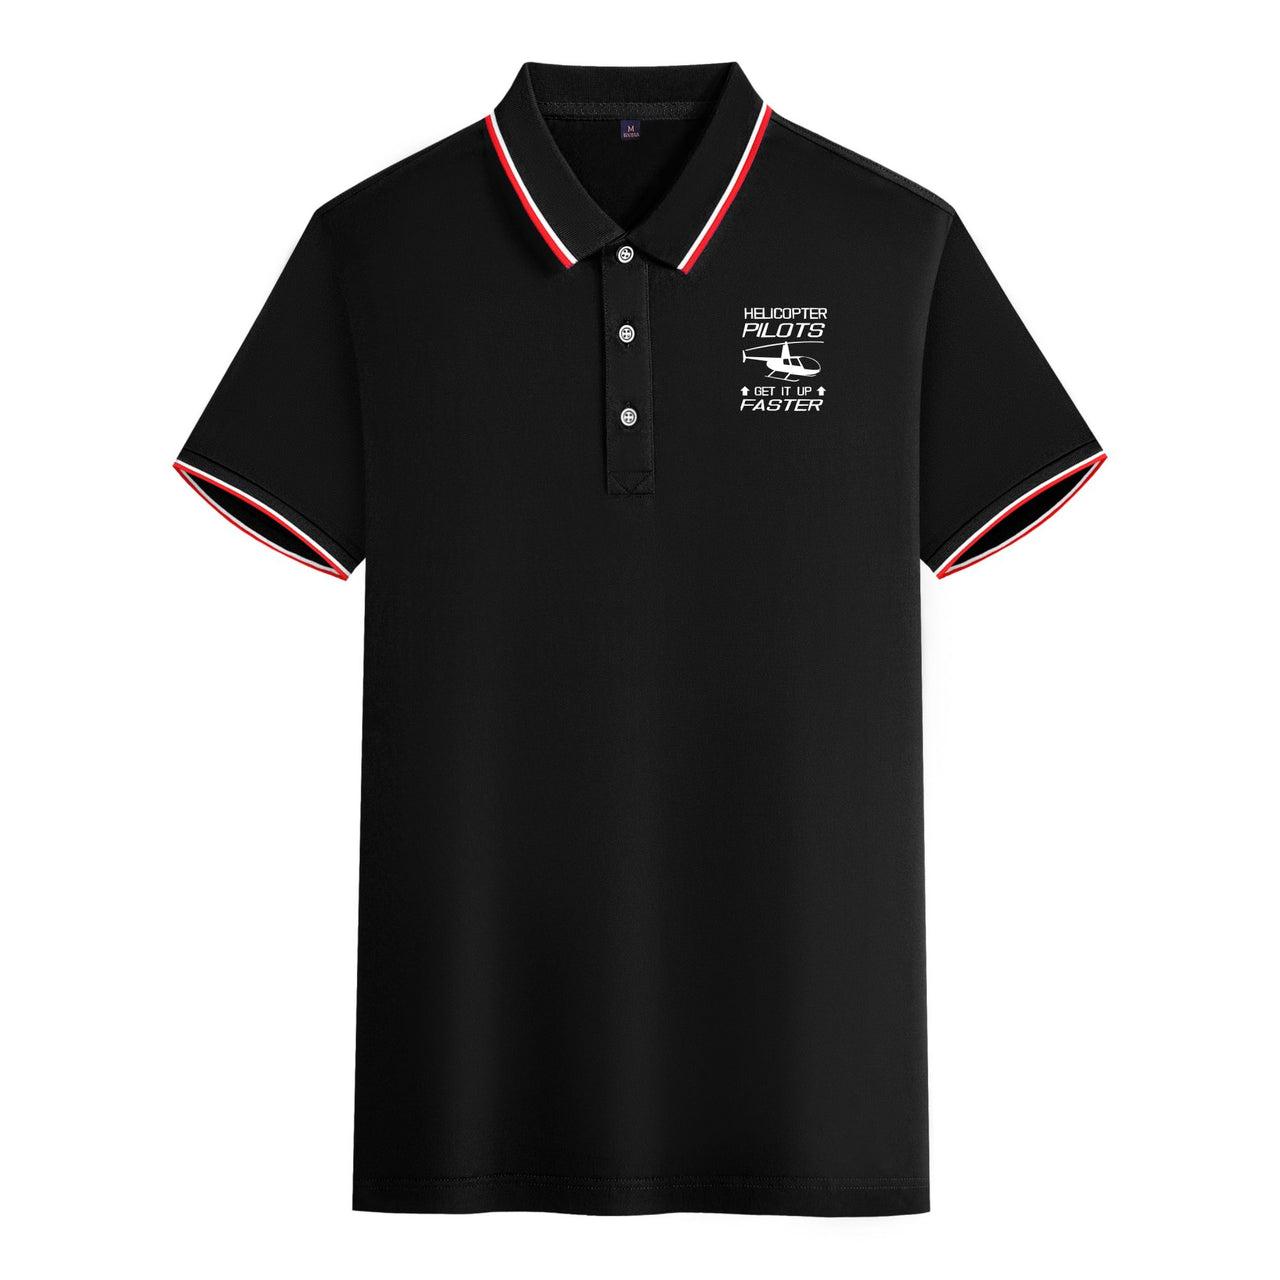 Helicopter Pilots Get It Up Faster Designed Stylish Polo T-Shirts